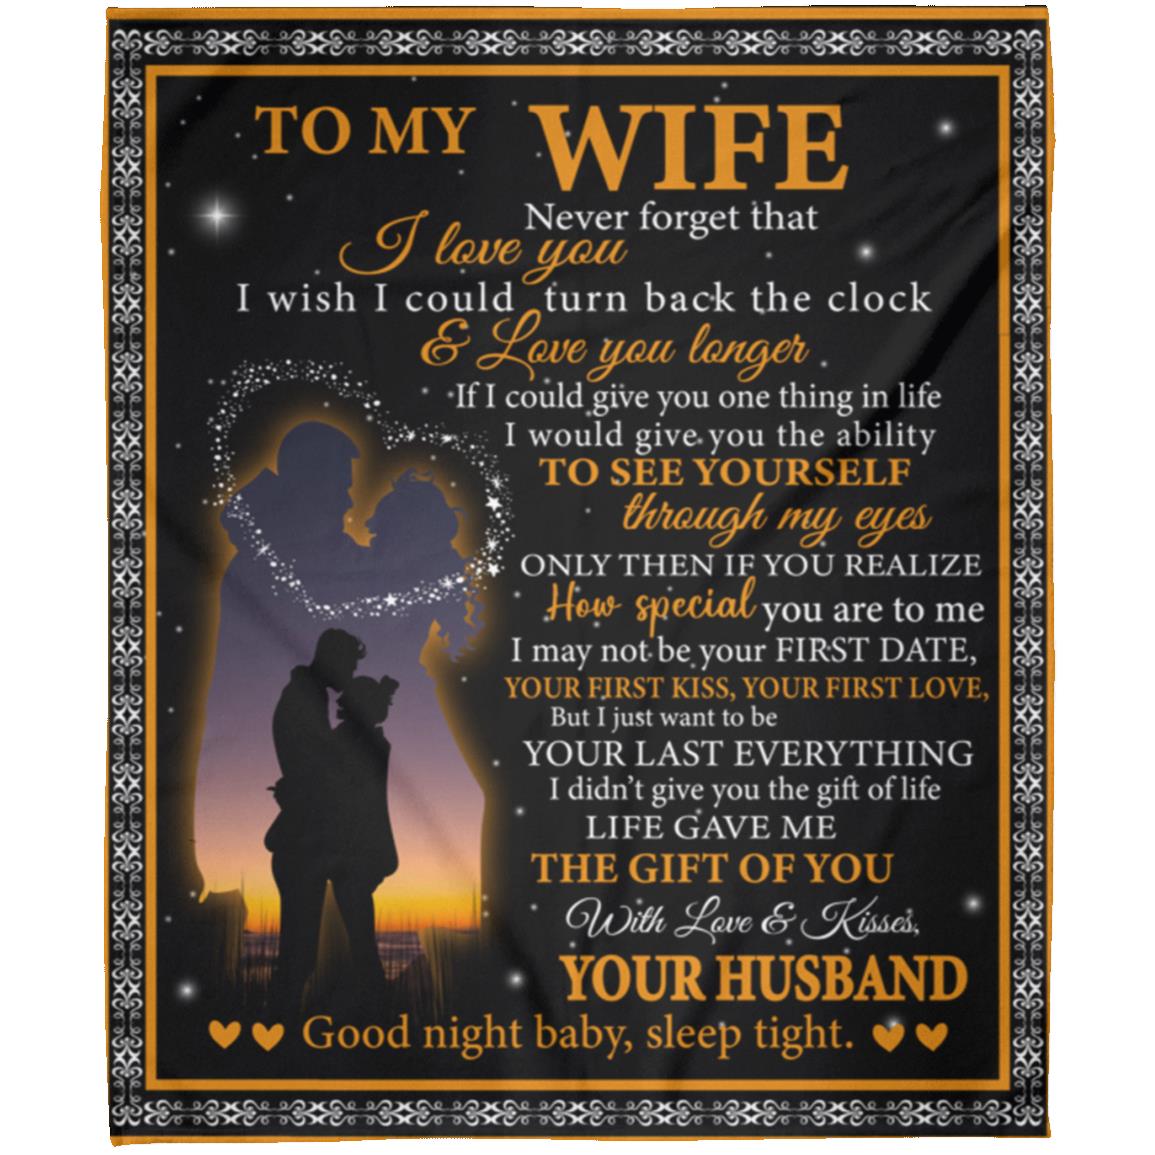 To My Wife, Never Forget...Premium Blankets (3 sizes to choose from)